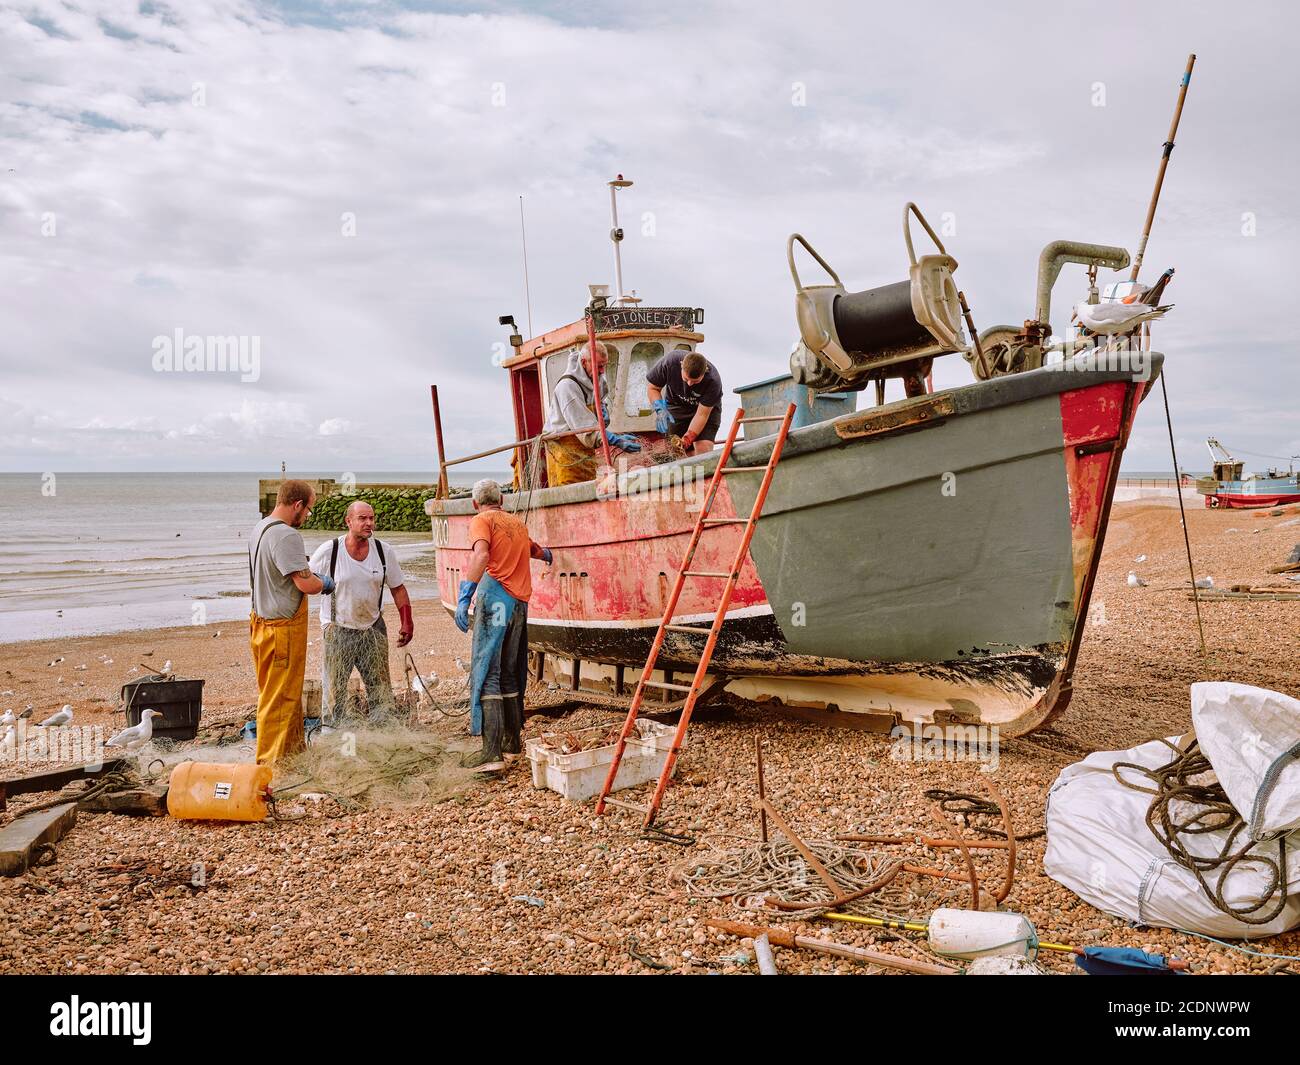 Fishermen landing their catch of Spider Crabs on The Stade shingle beach in Hastings Old Town, East Sussex England UK - Crab fishing boat Stock Photo